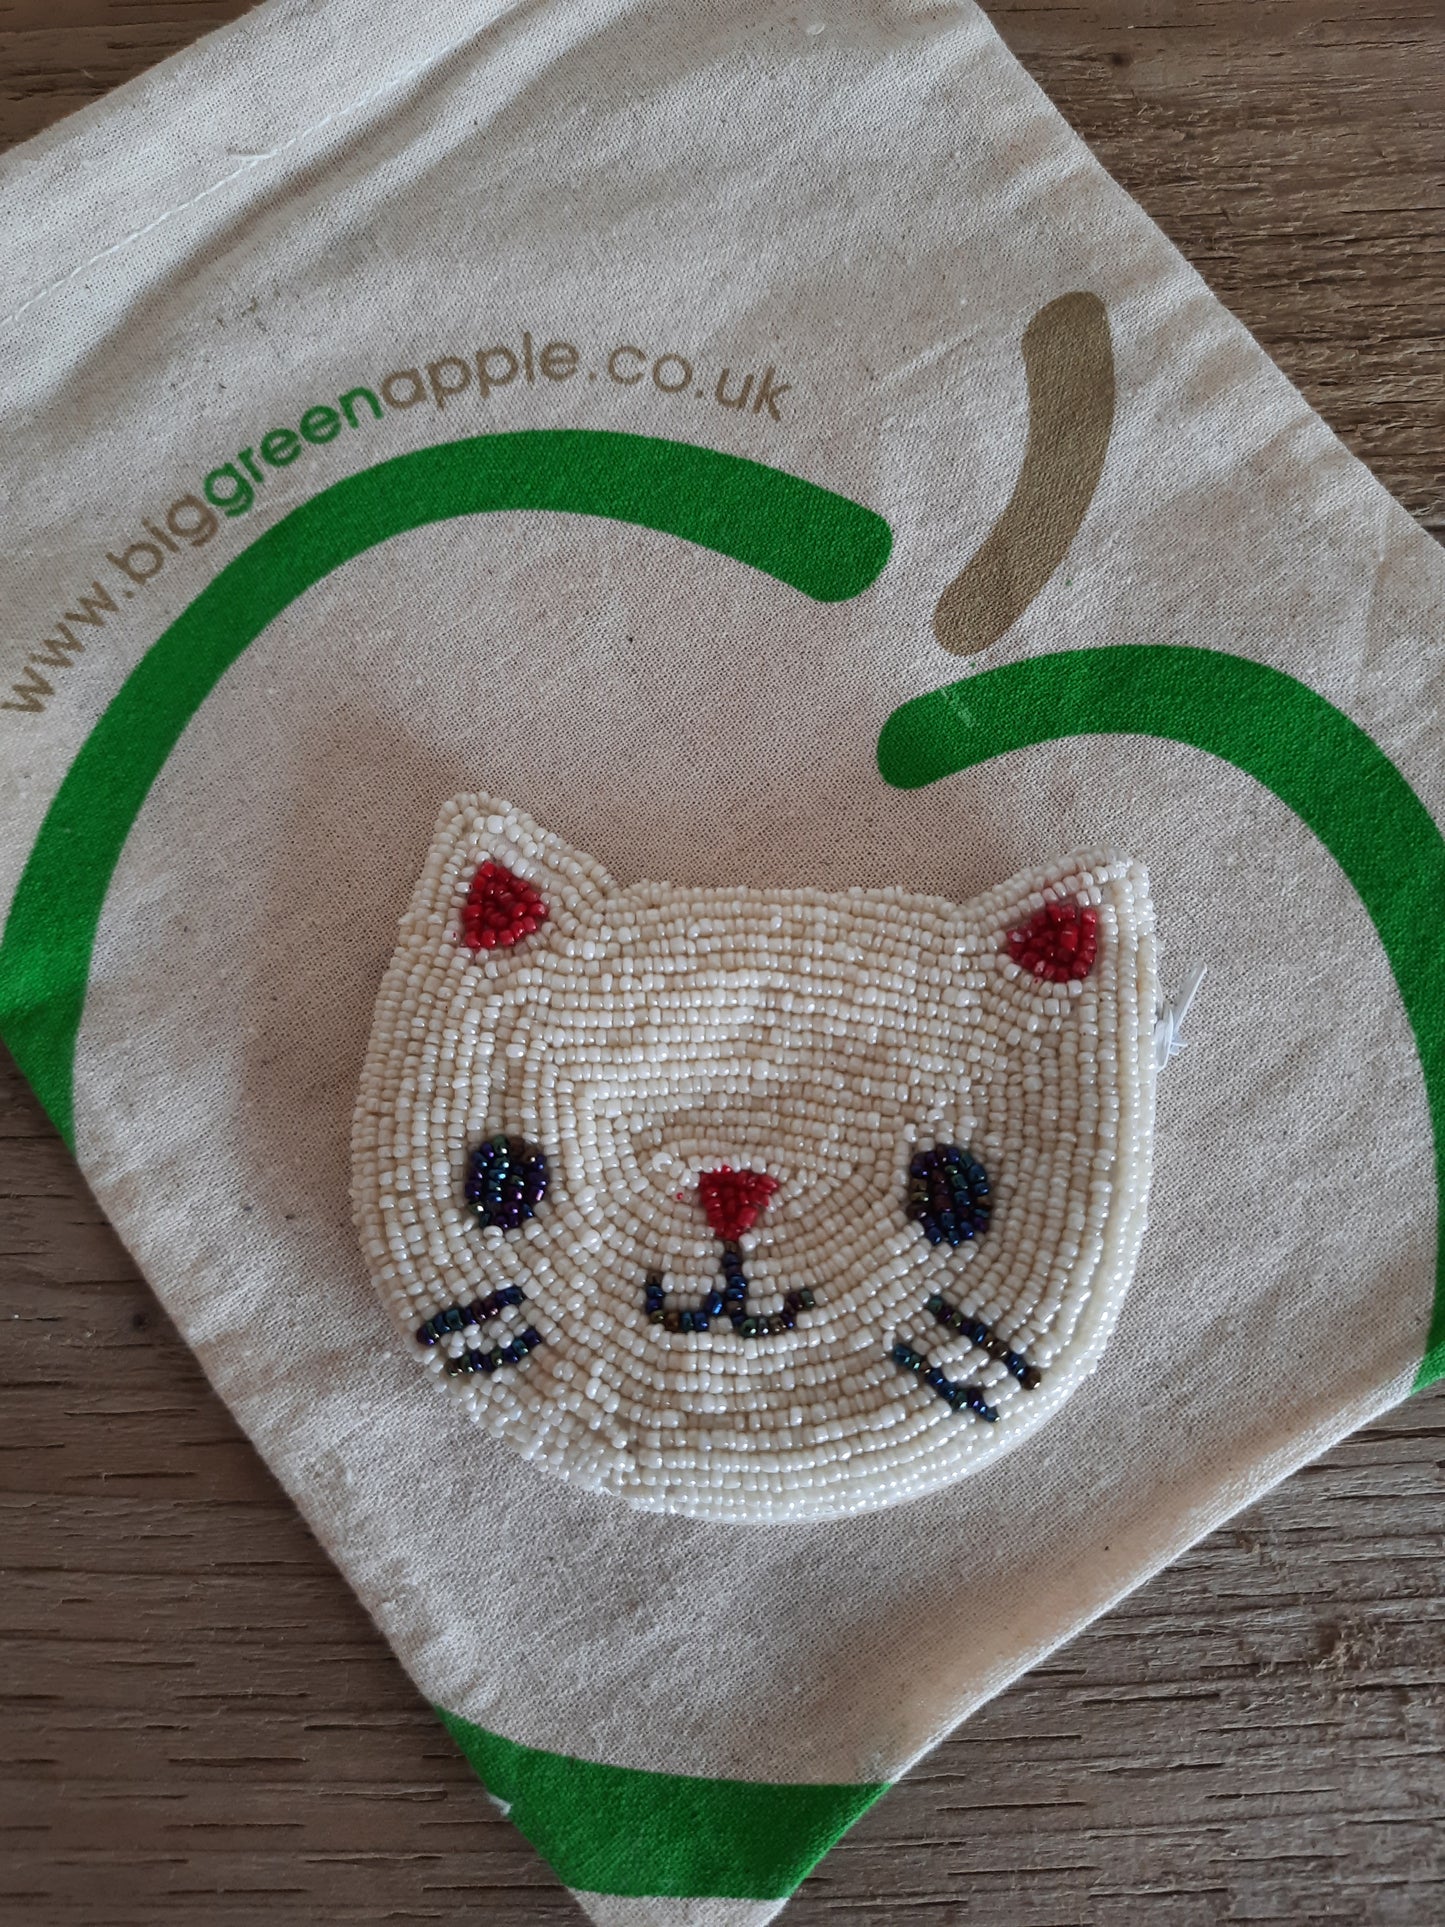 Fair Trade Purses | Ethical Store | Cute Cat | Gift Ideas | Ethical Brands |